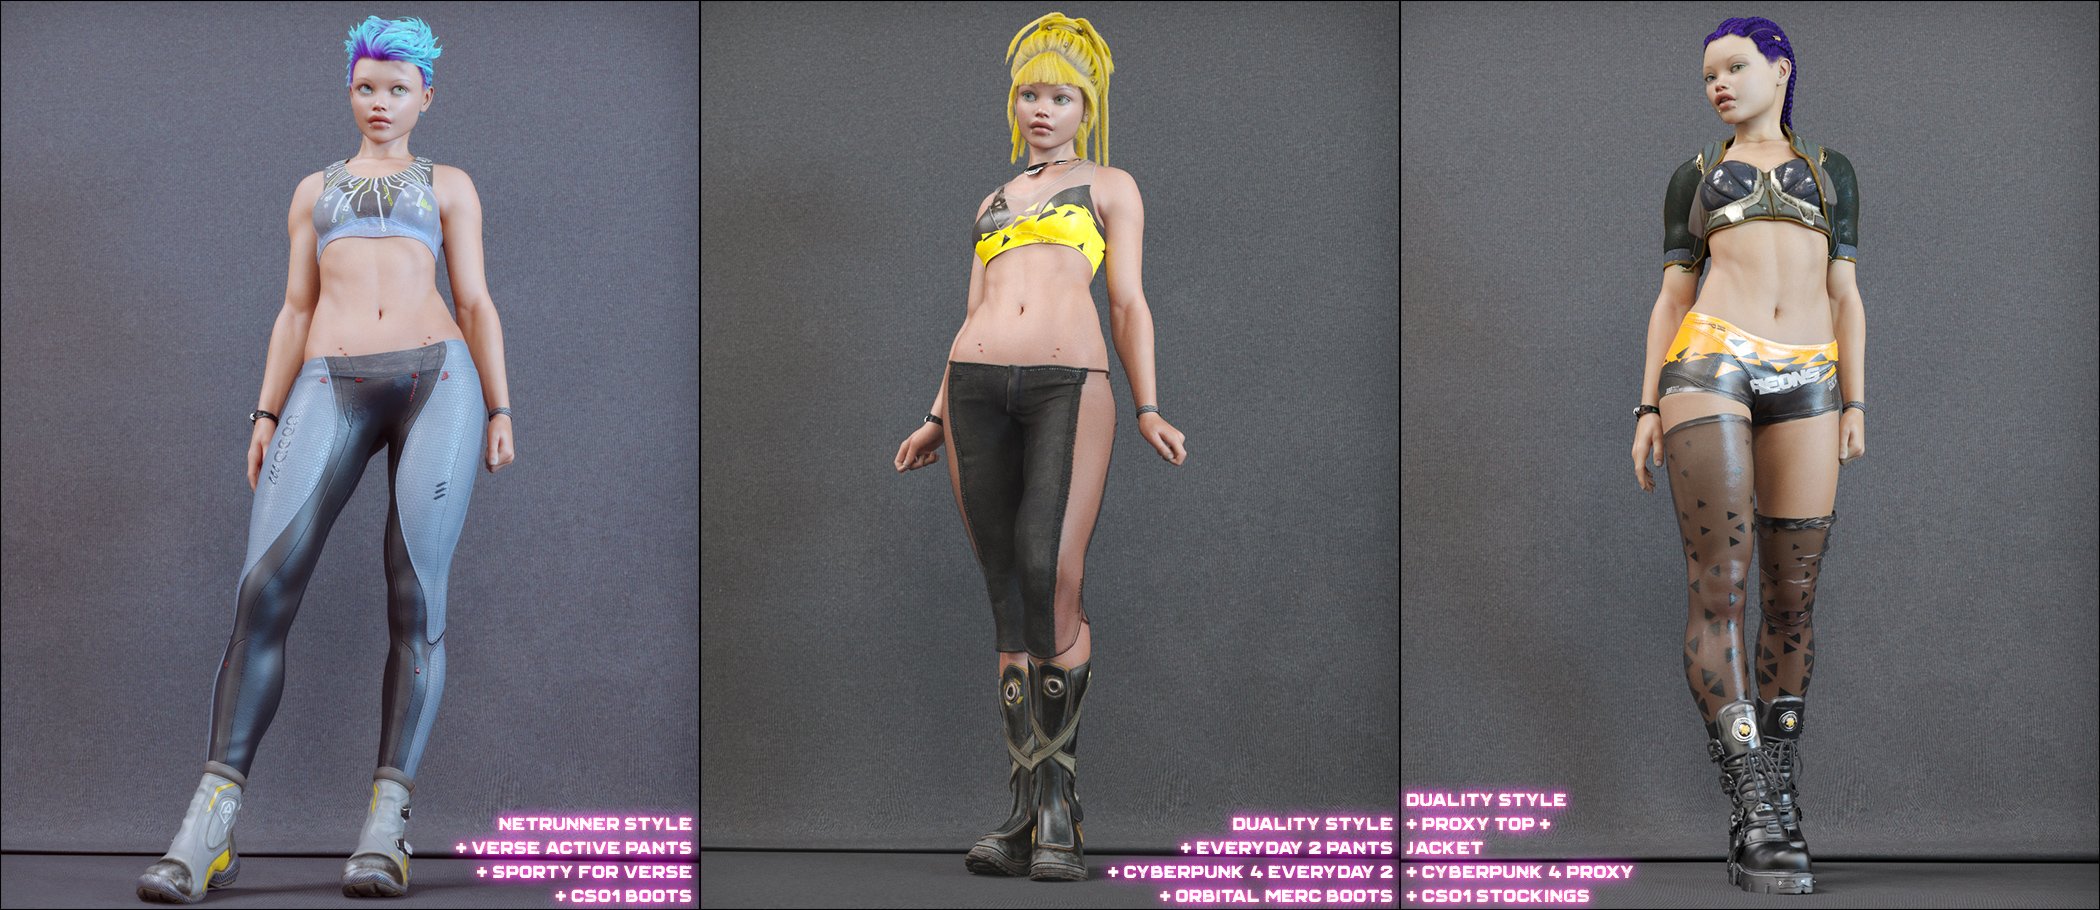 Cyberpunk Styles for Zero One Clothing Sets by: Aeon Soul, 3D Models by Daz 3D